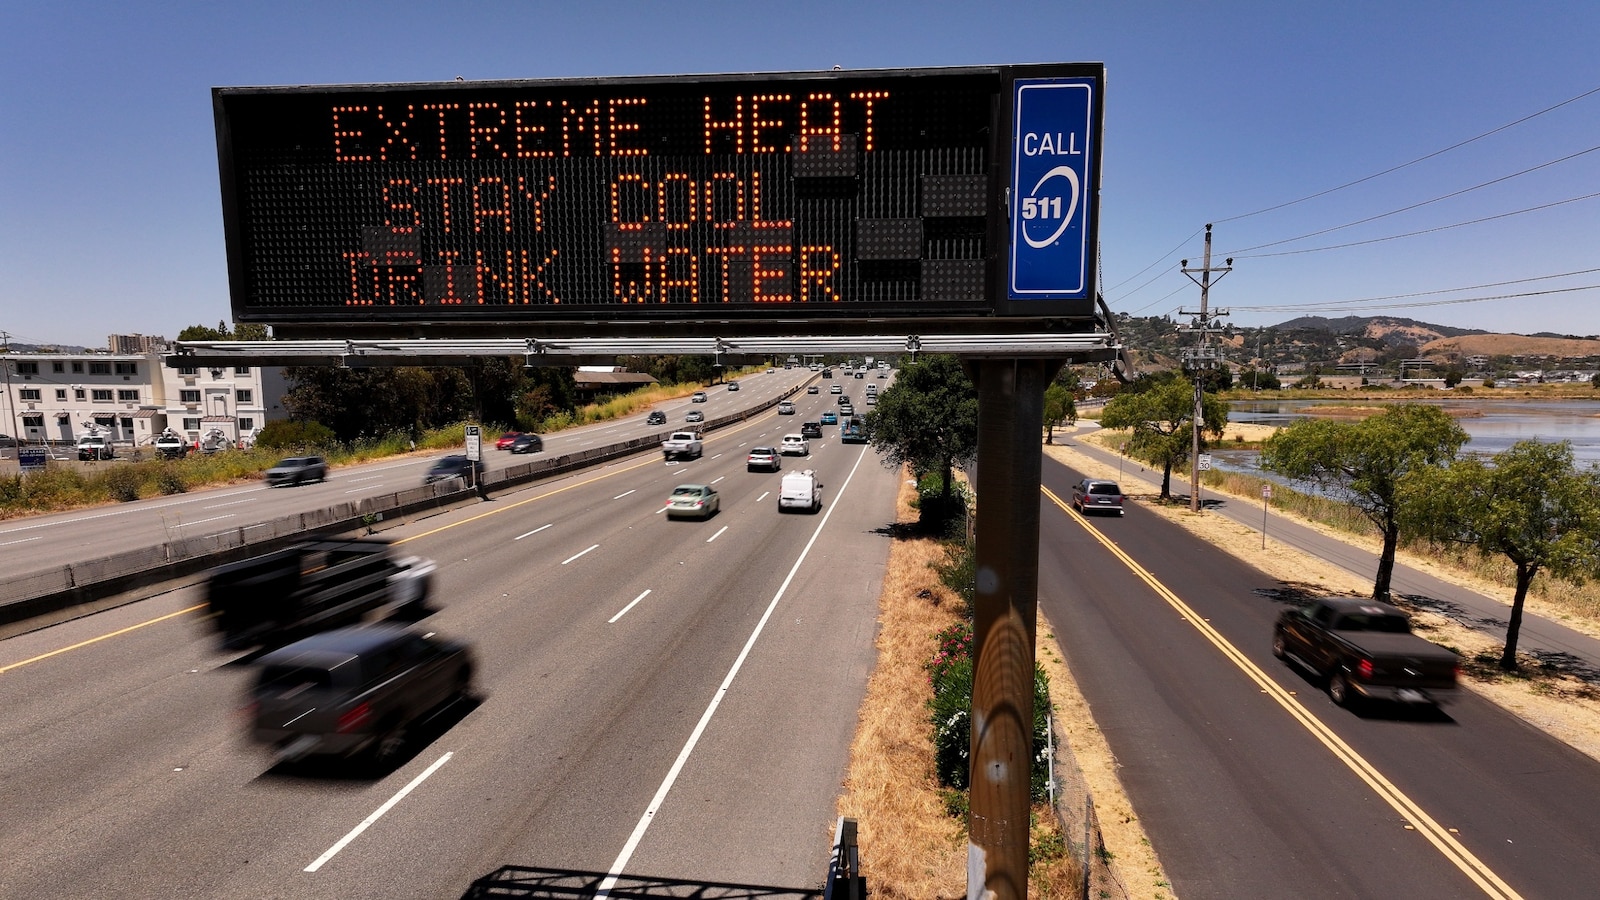 Heat wave sets in on West Coast with worst yet to come [Video]